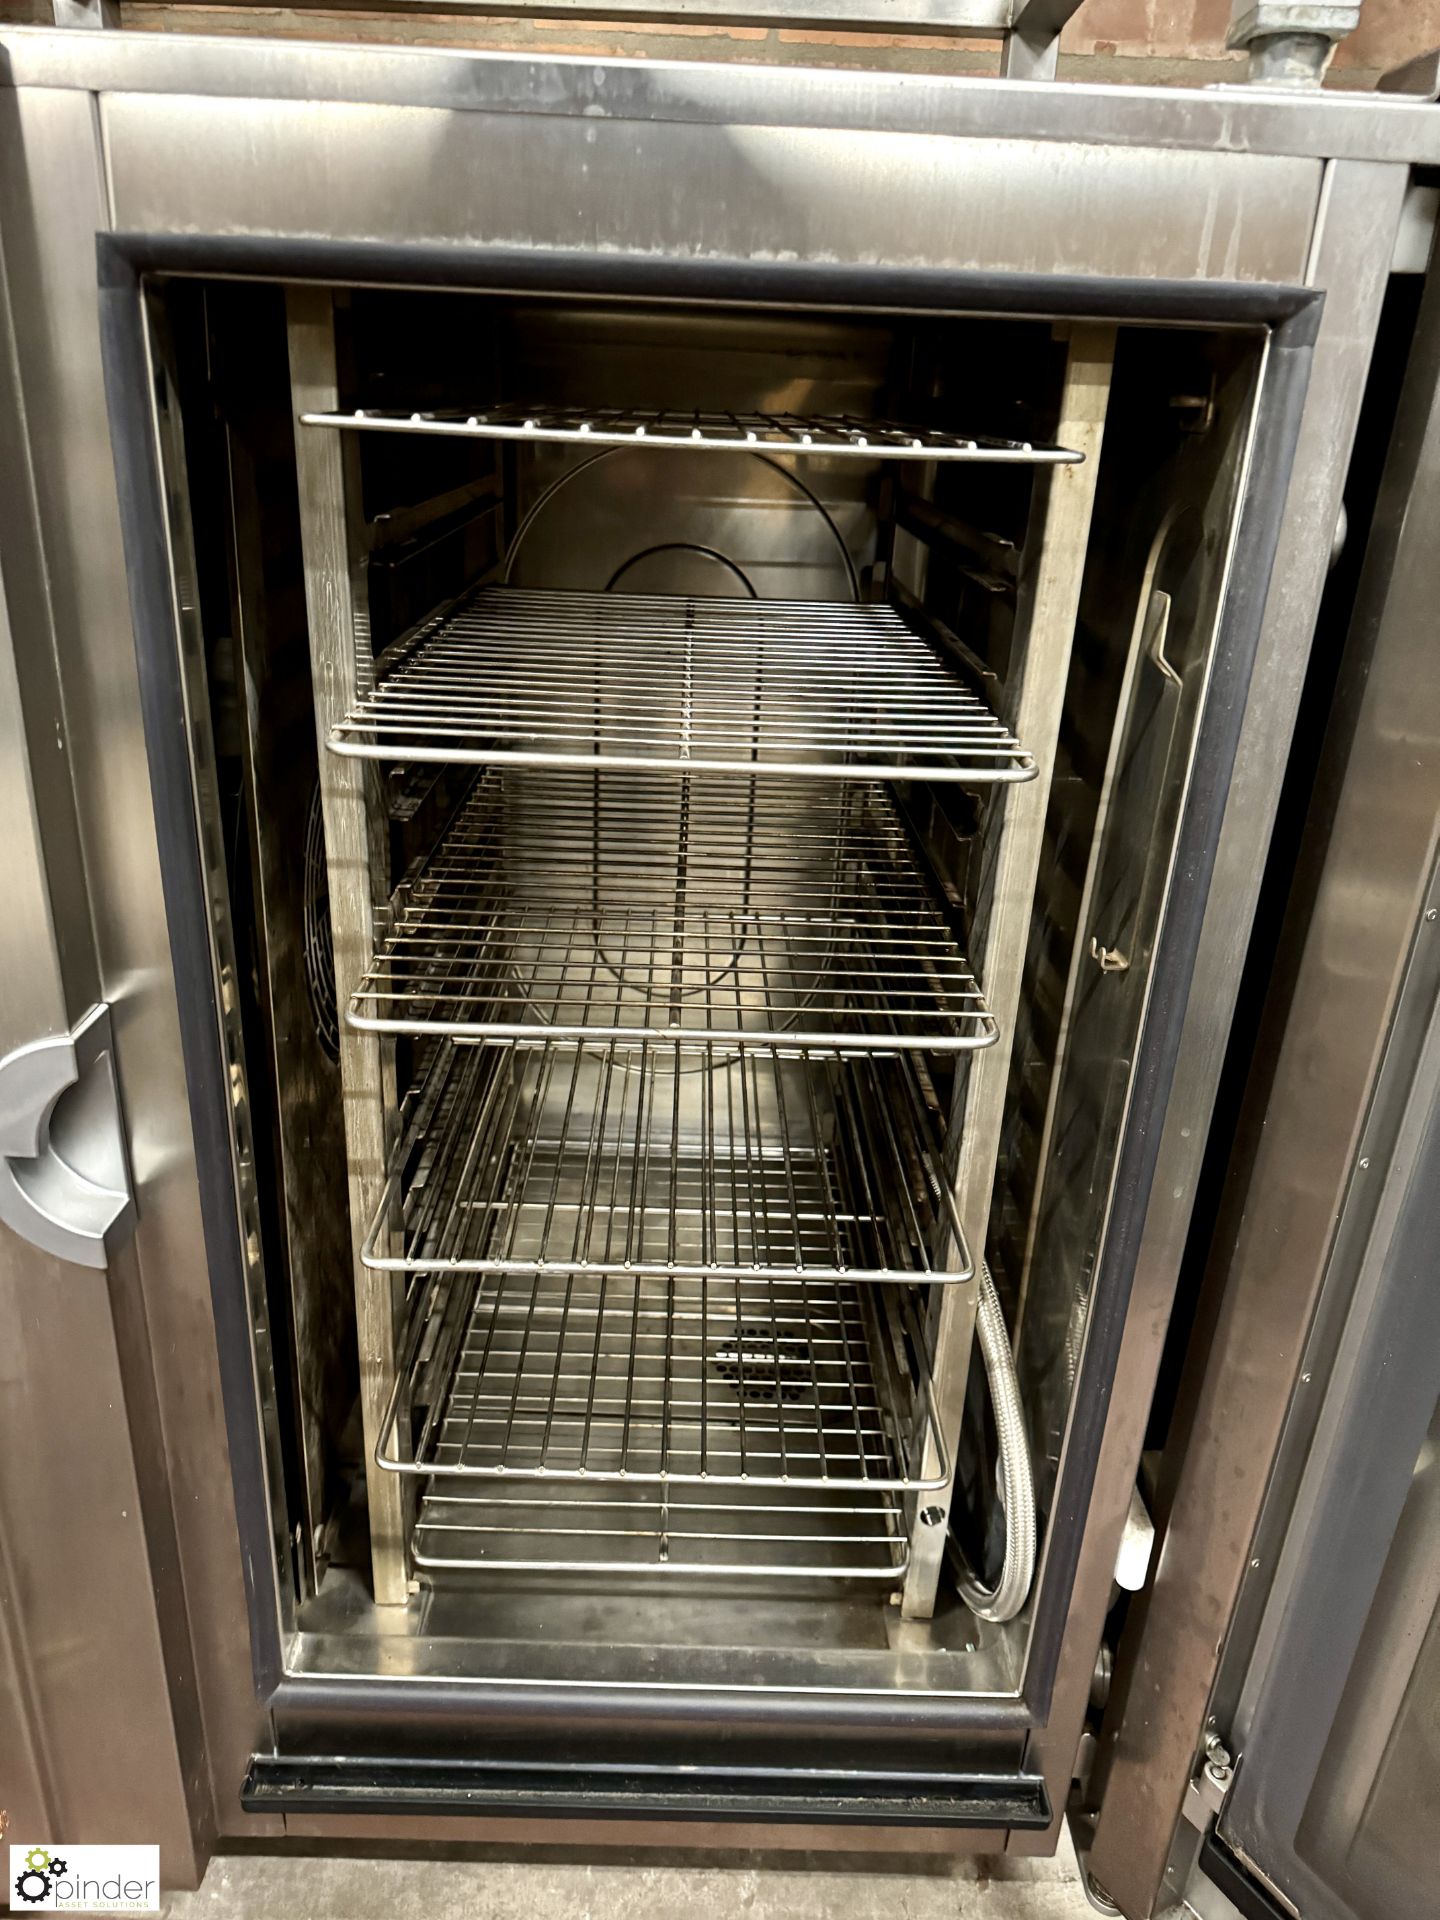 Convotherm OES 1010 Combi Oven, 940mm x 810mm x 1100mm, 415volts, no control panel front, with - Image 6 of 7